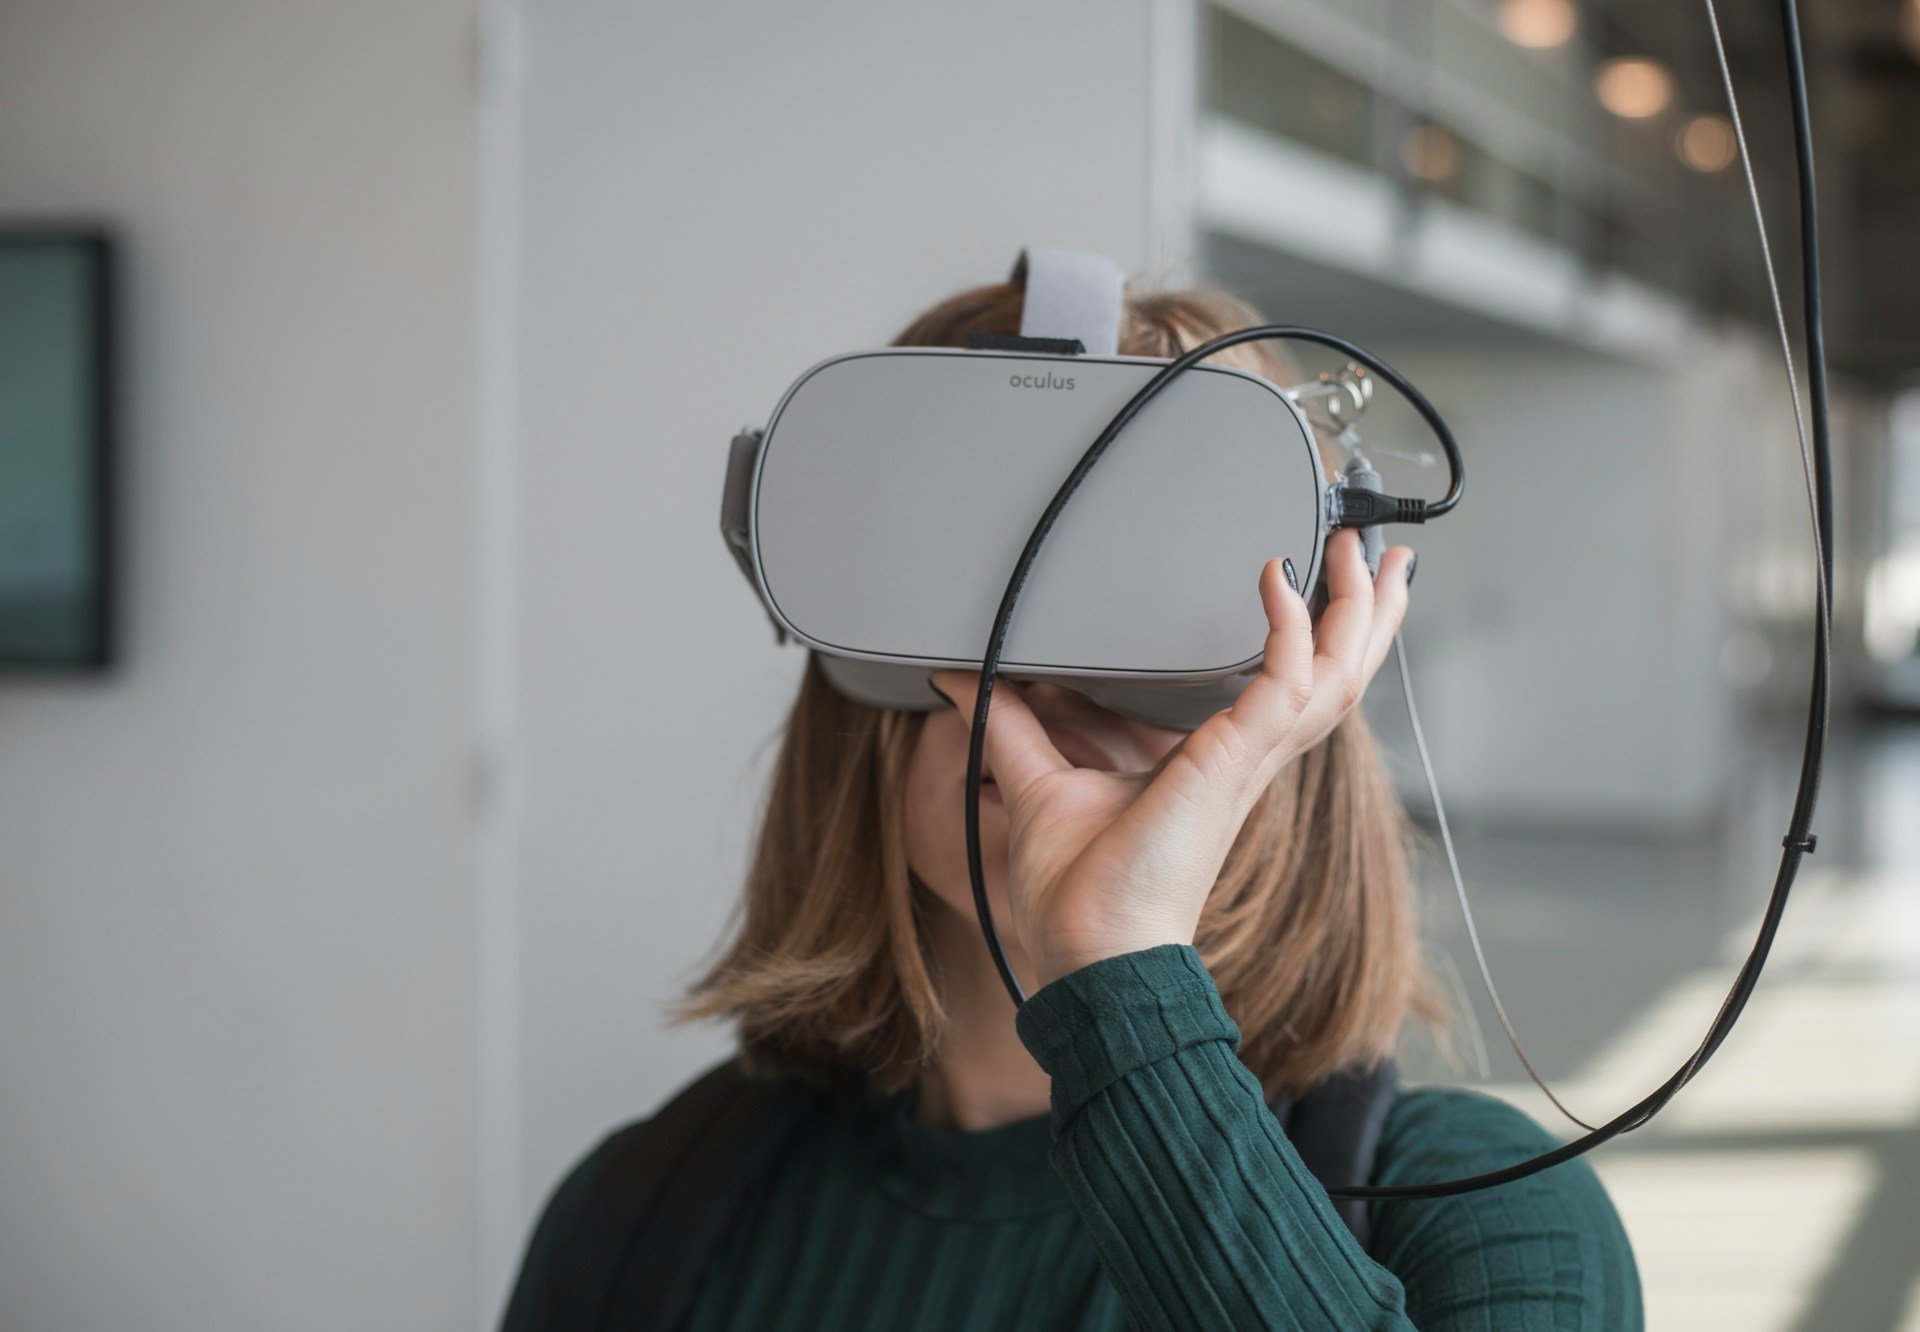 image of vr headset on head